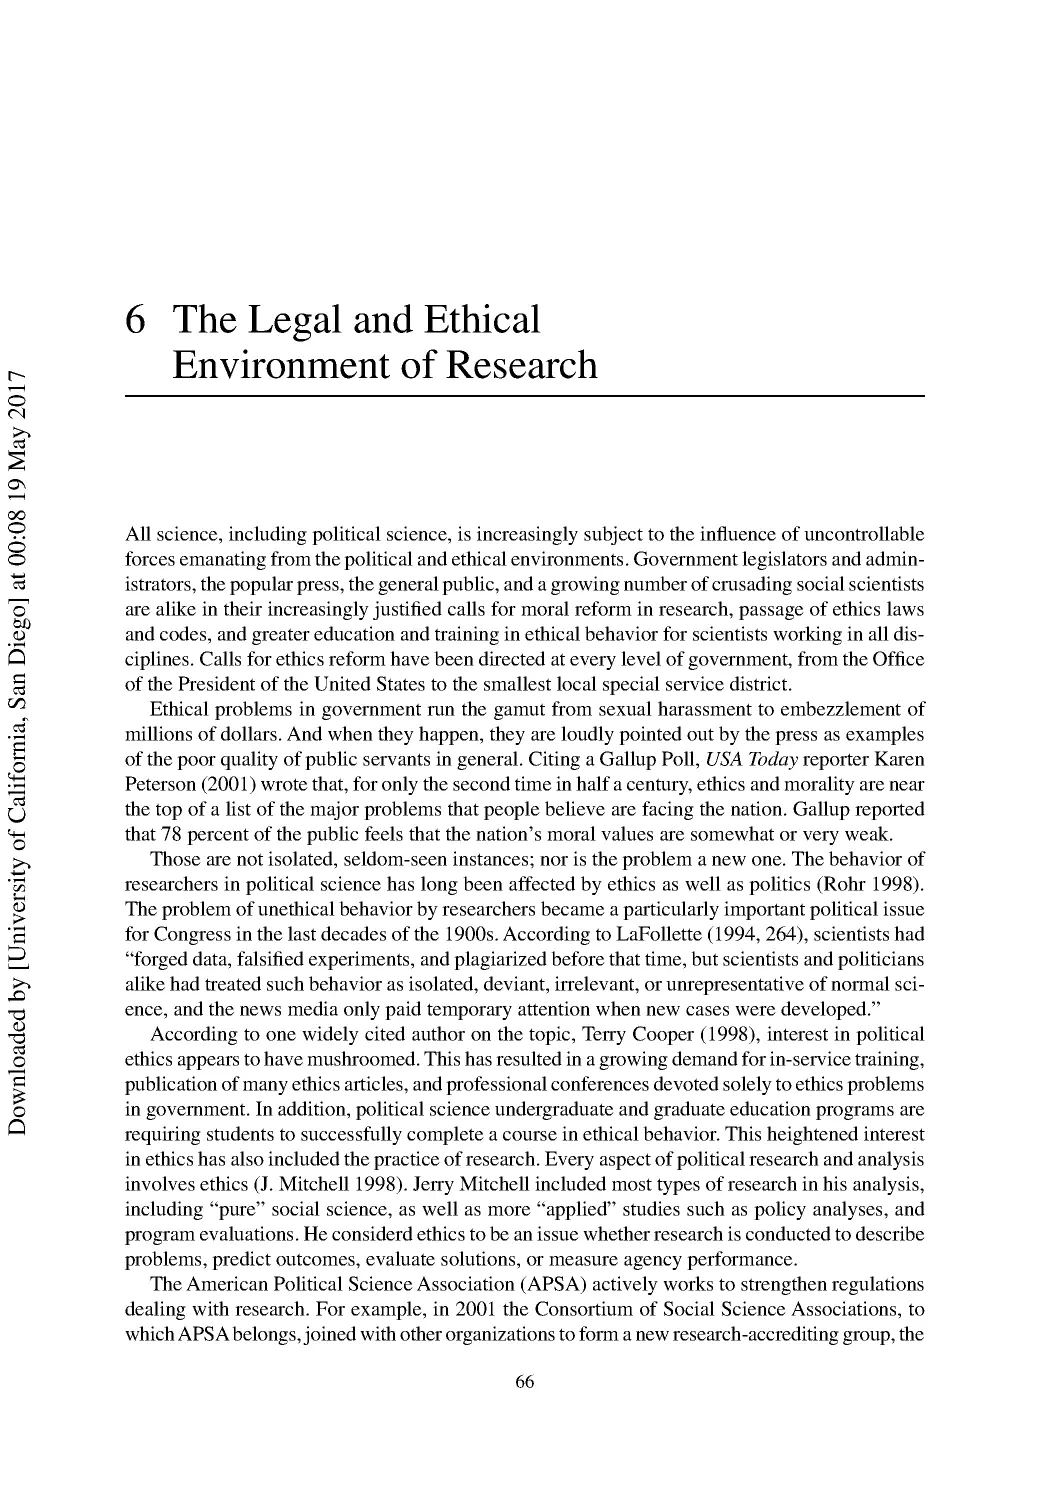 6 The Legal and Ethical Environment of Research